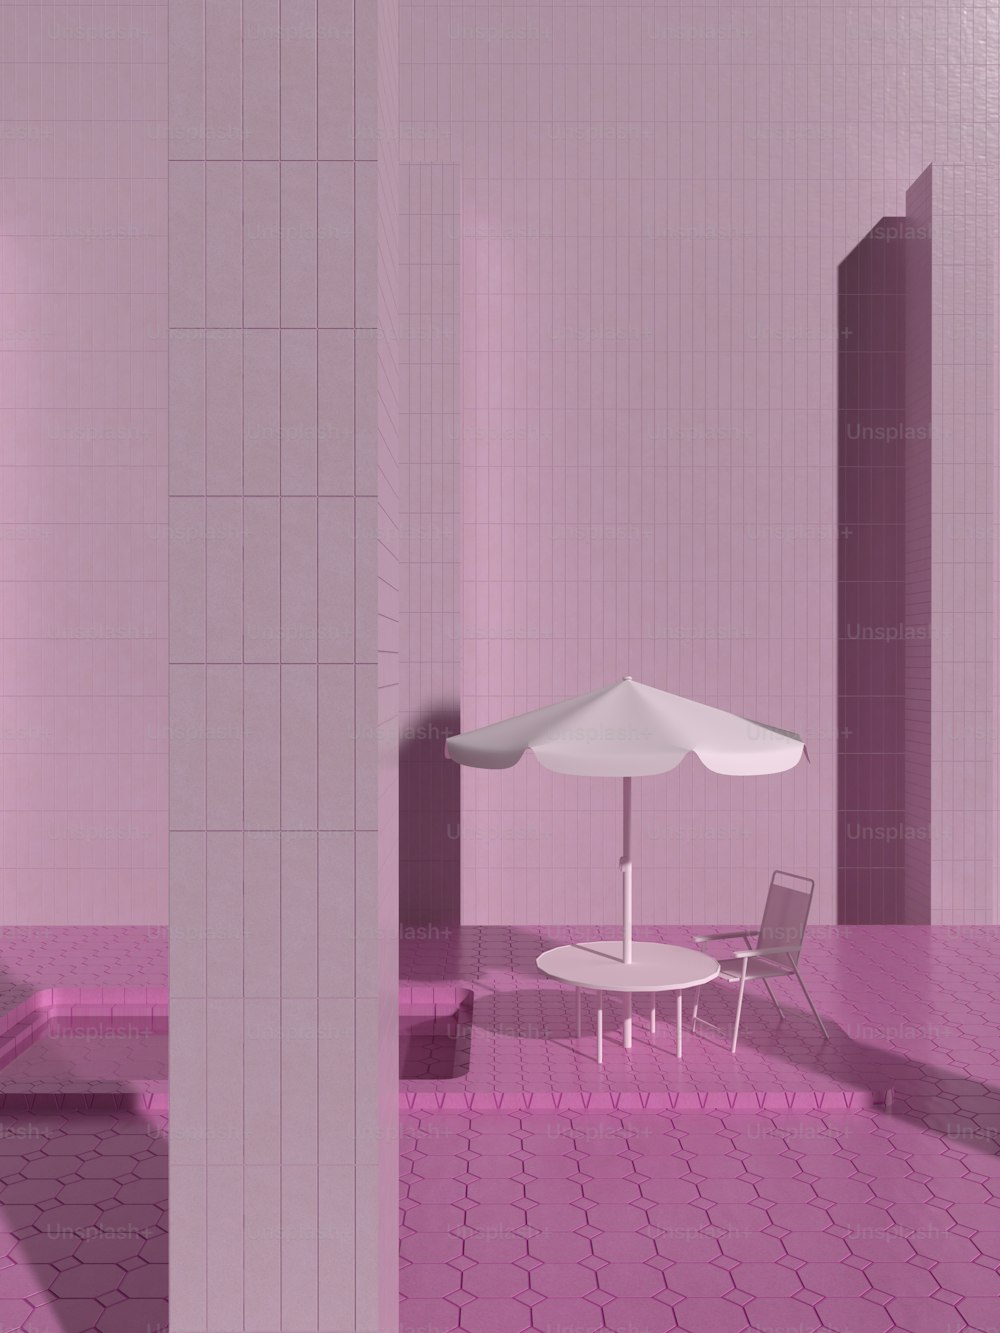 a room with a chair, table and umbrella